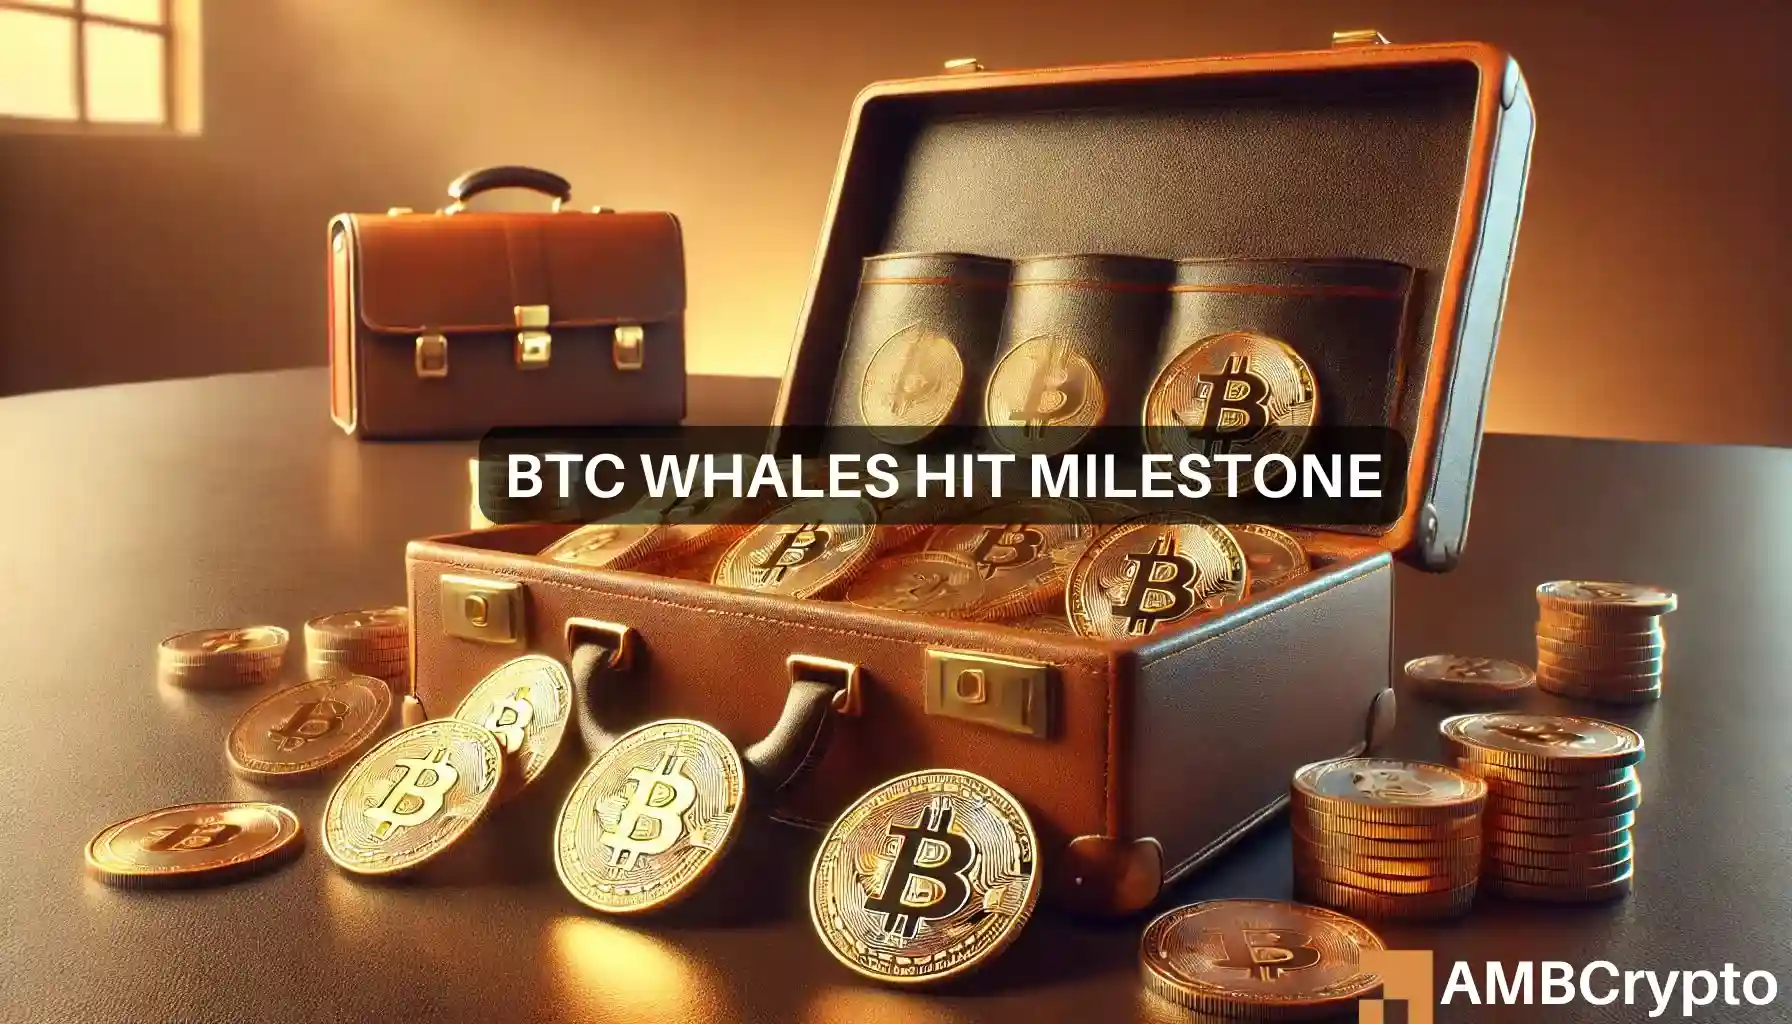 2-year high for Bitcoin’s whales – What does that mean for you?